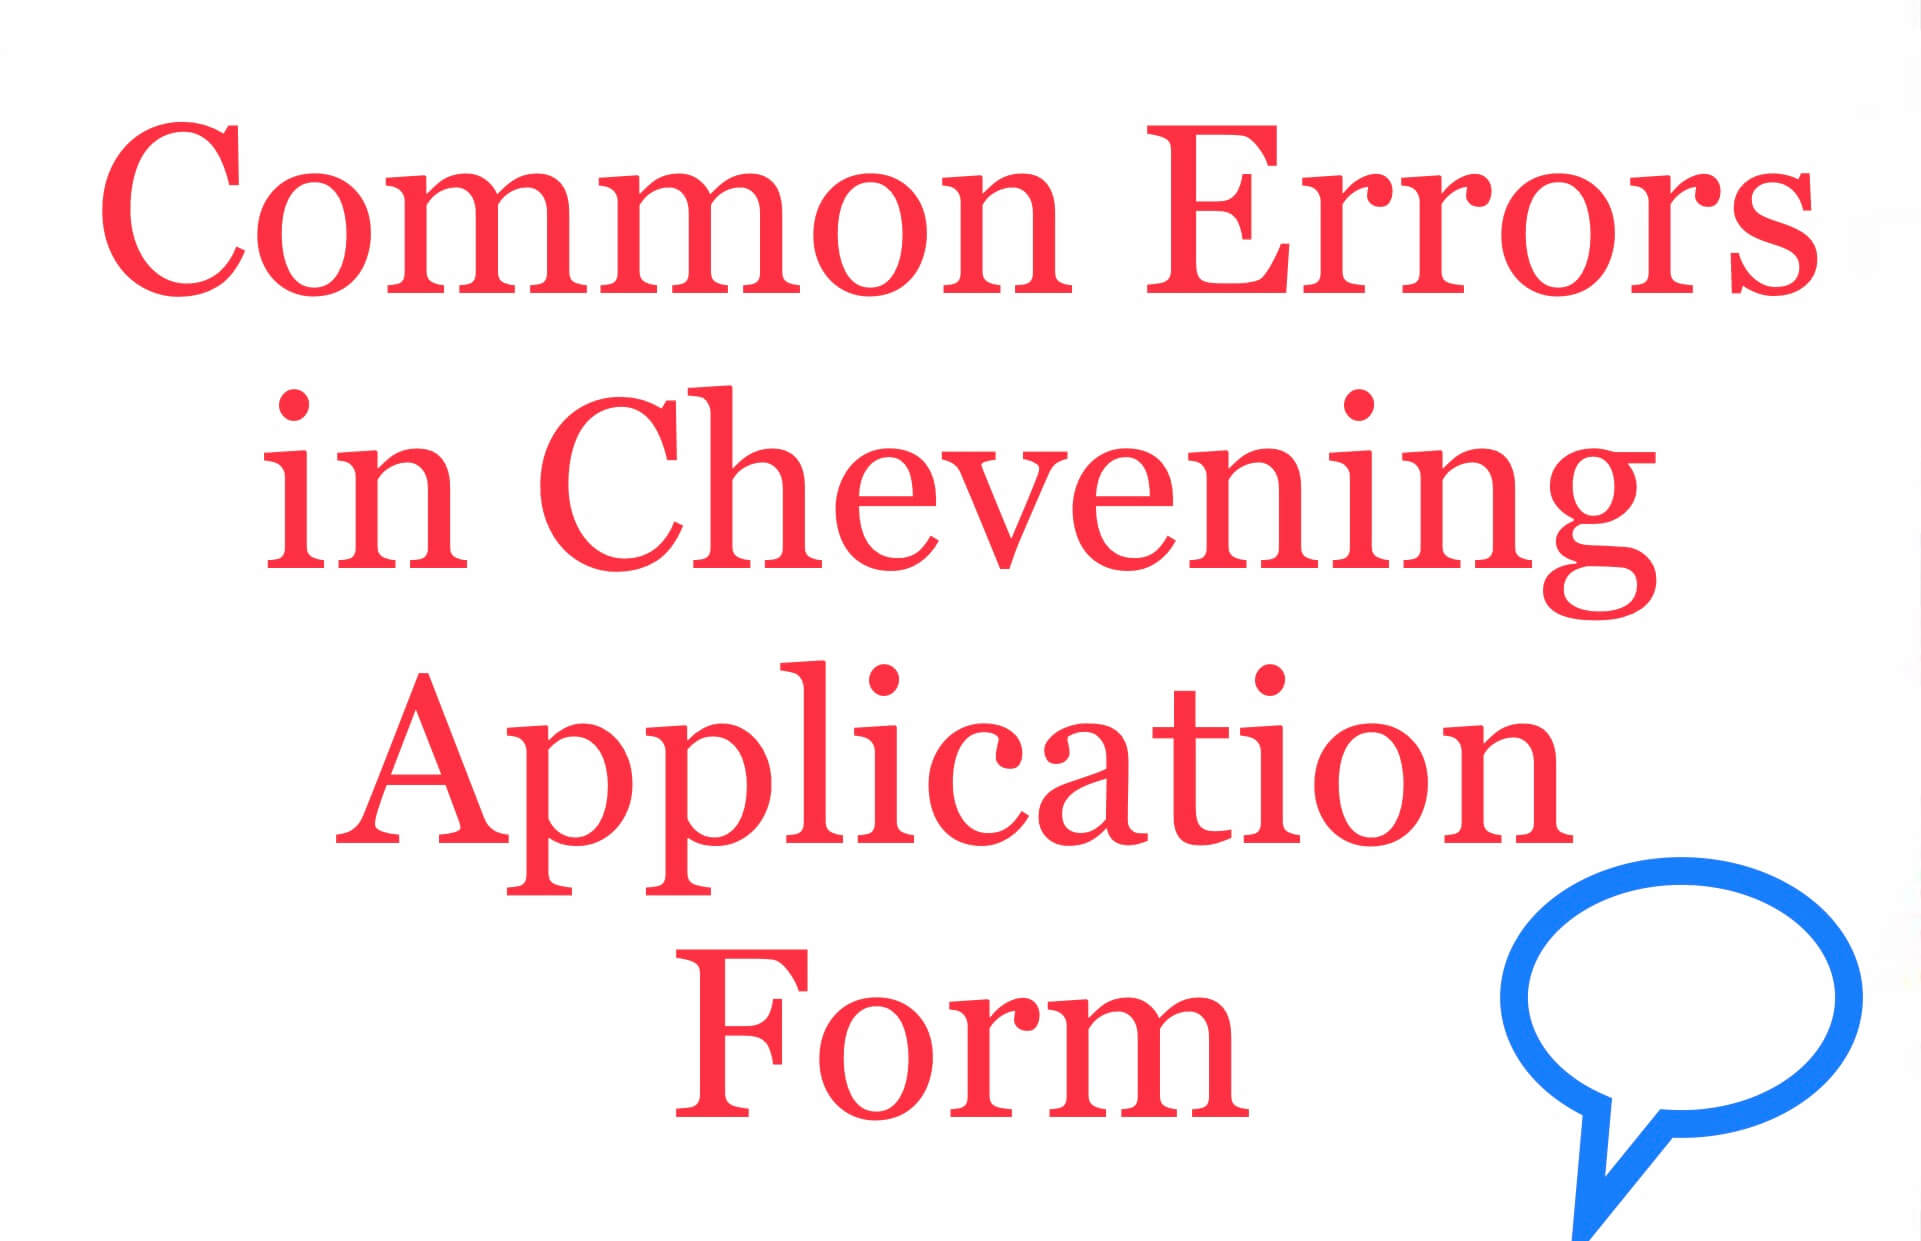 Common mistakes in Chevening scholarship application form